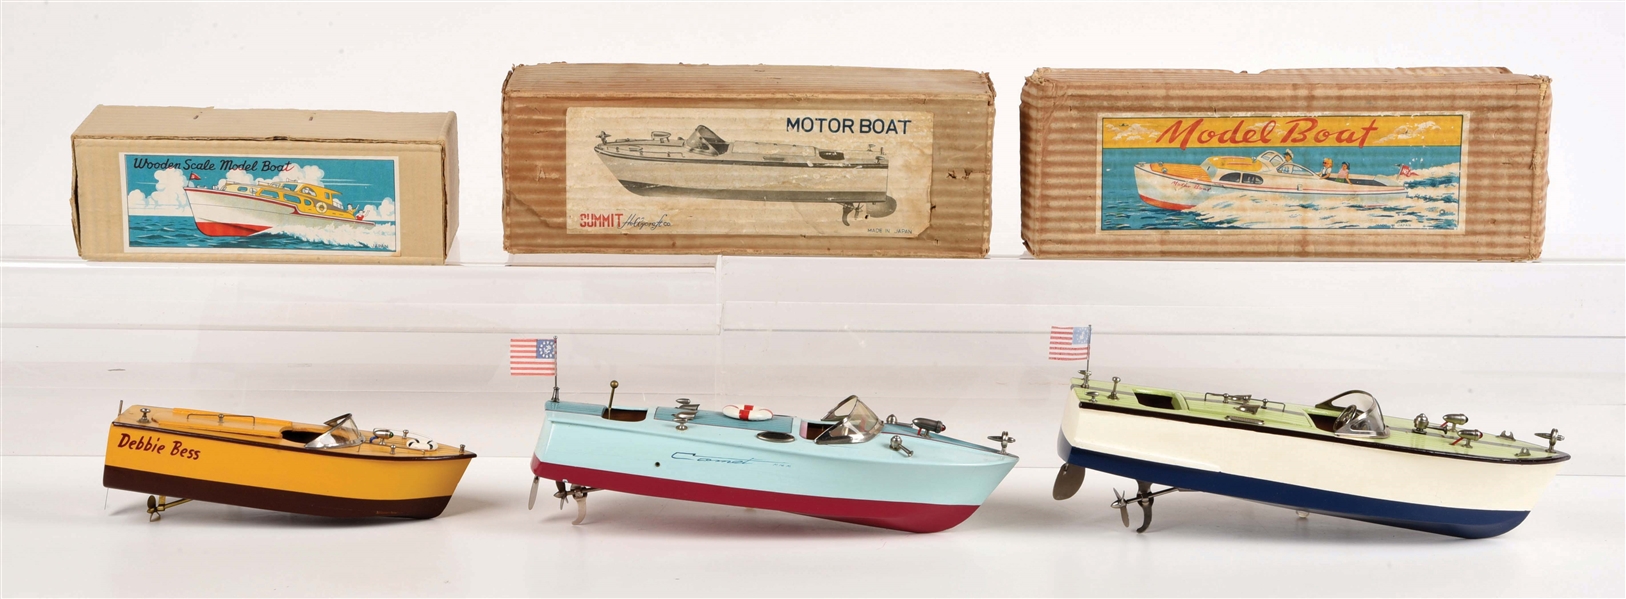 LOT OF 3: JAPANESE WOODEN BATTERY-OPERATED BOATS IN ORIGINAL BOXES.